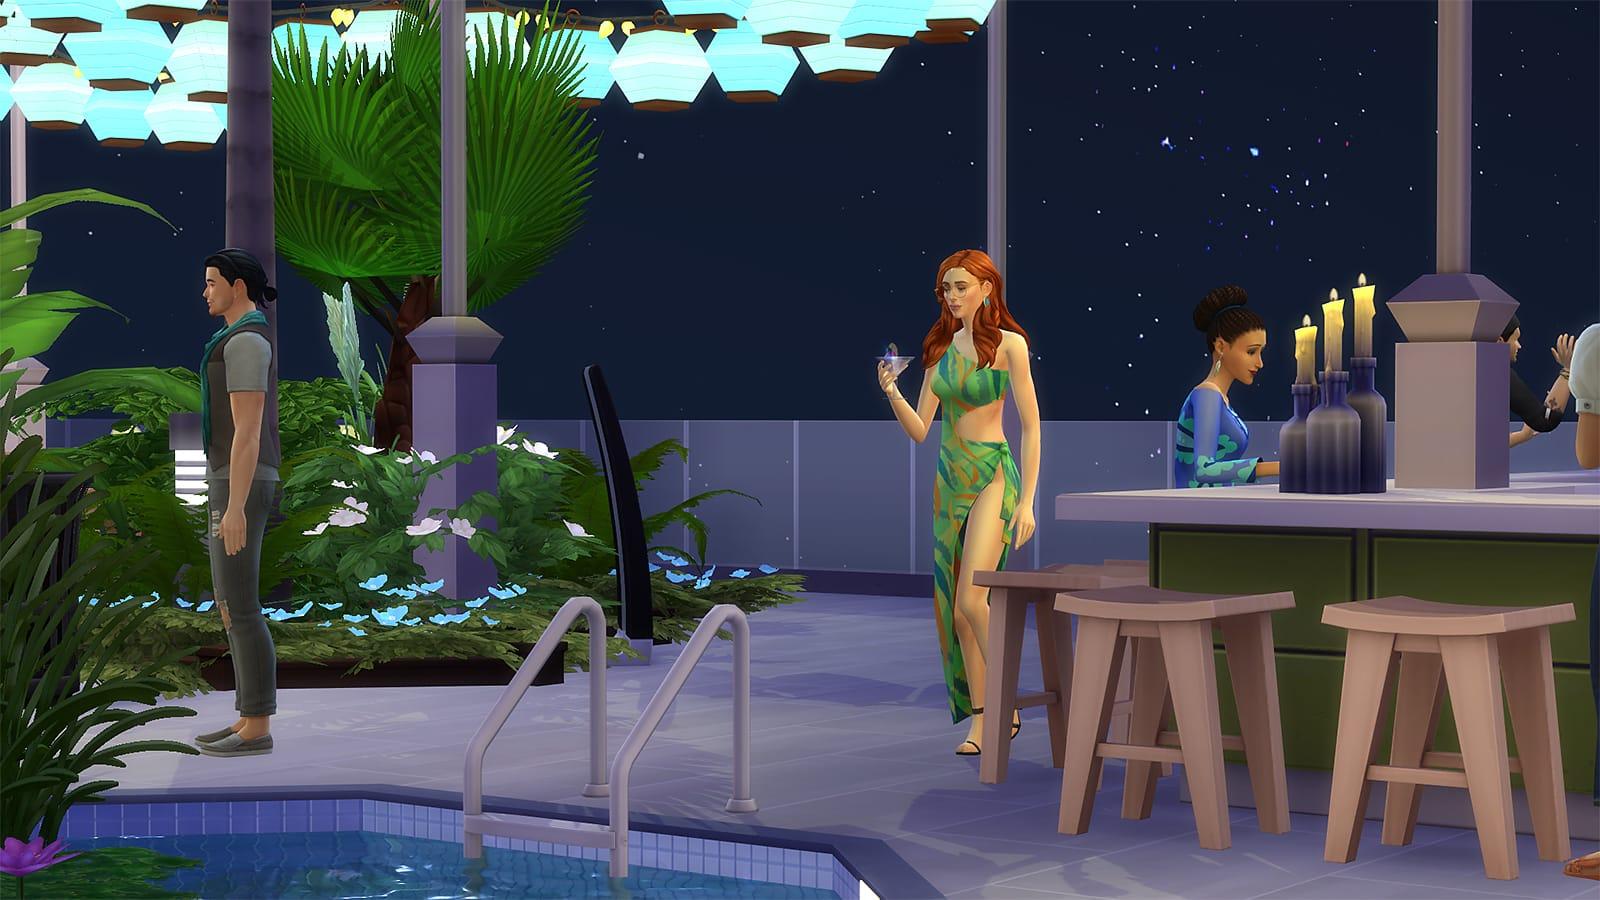 Sims on a rooftop bar